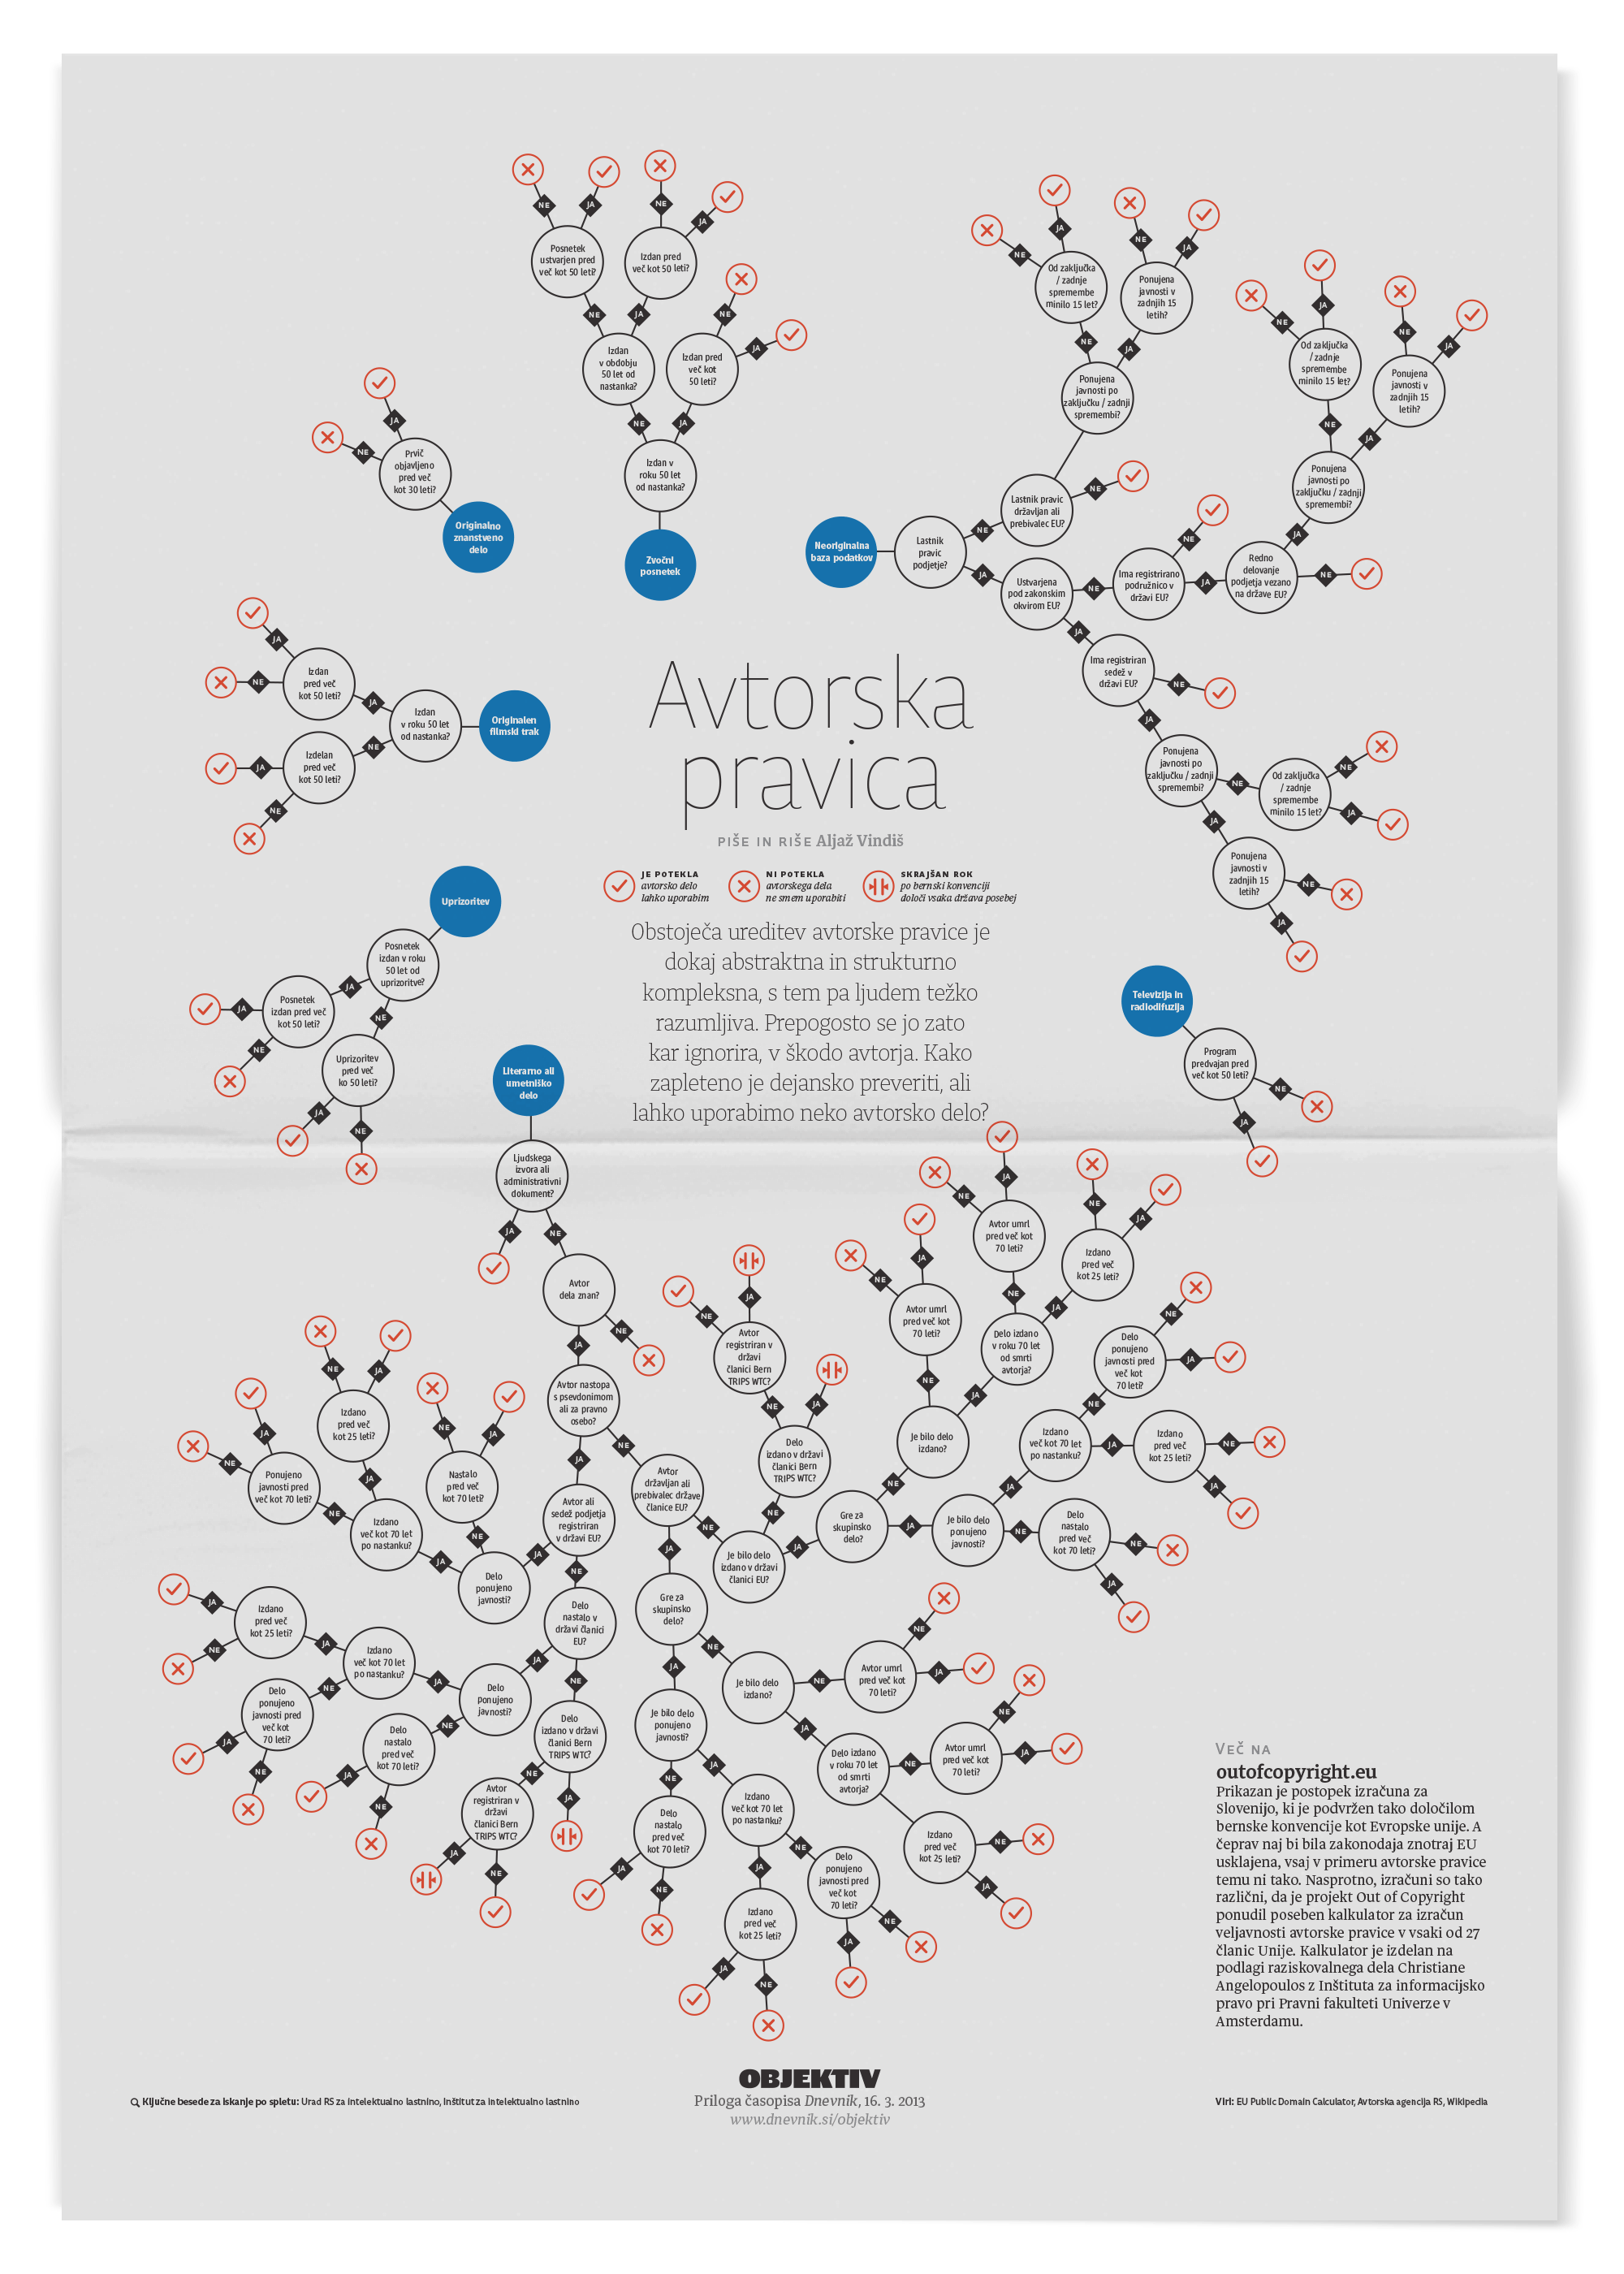 A decision tree visualization of Slovene copyright law.